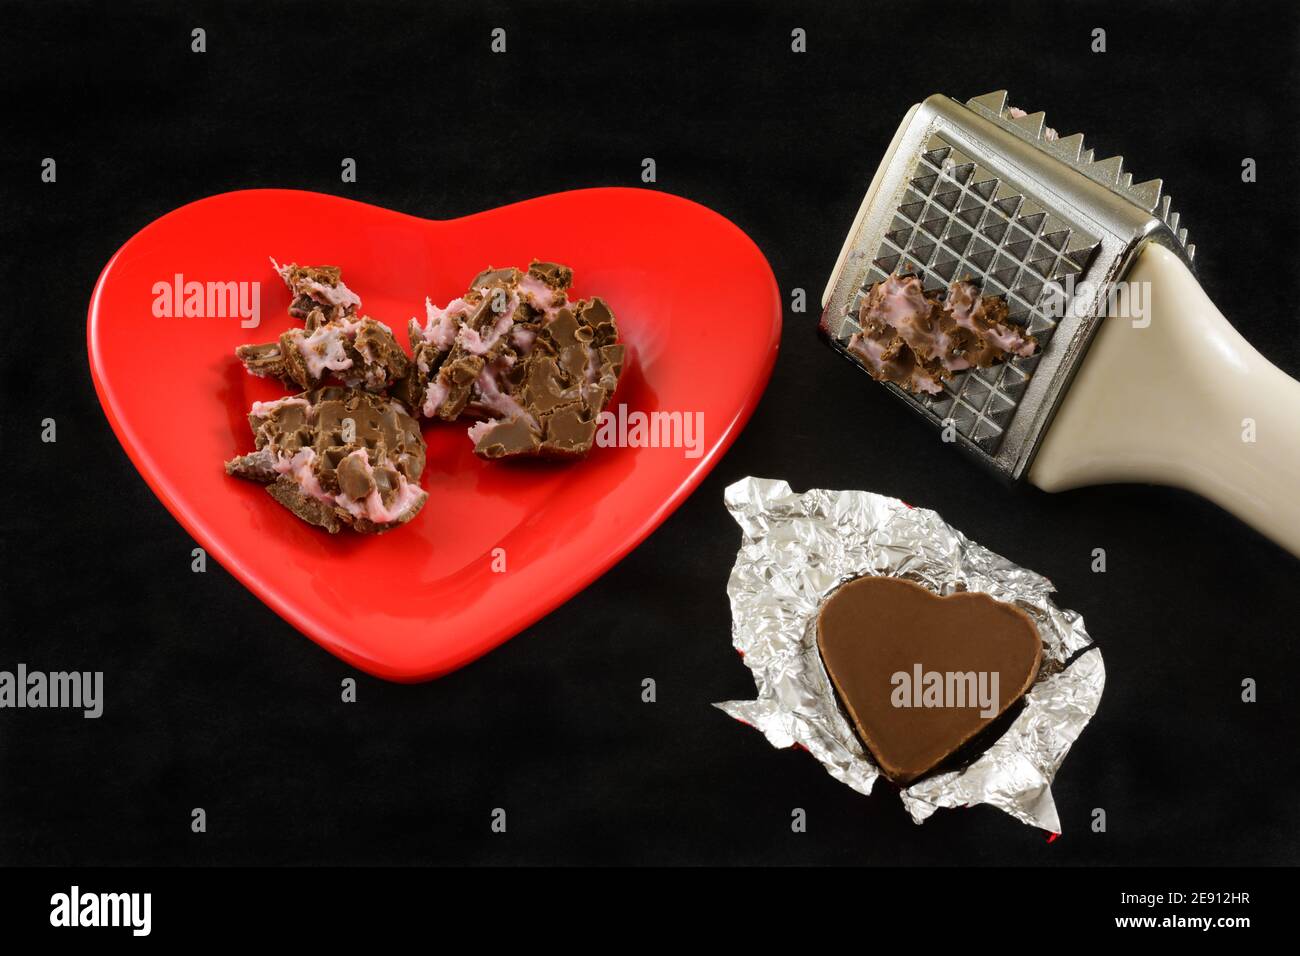 Crushed shredded chocolate heart with pink filling and meat tenderizer mallet and chocolate heart in foil as anti-Valentine symbol of divorce or broke Stock Photo